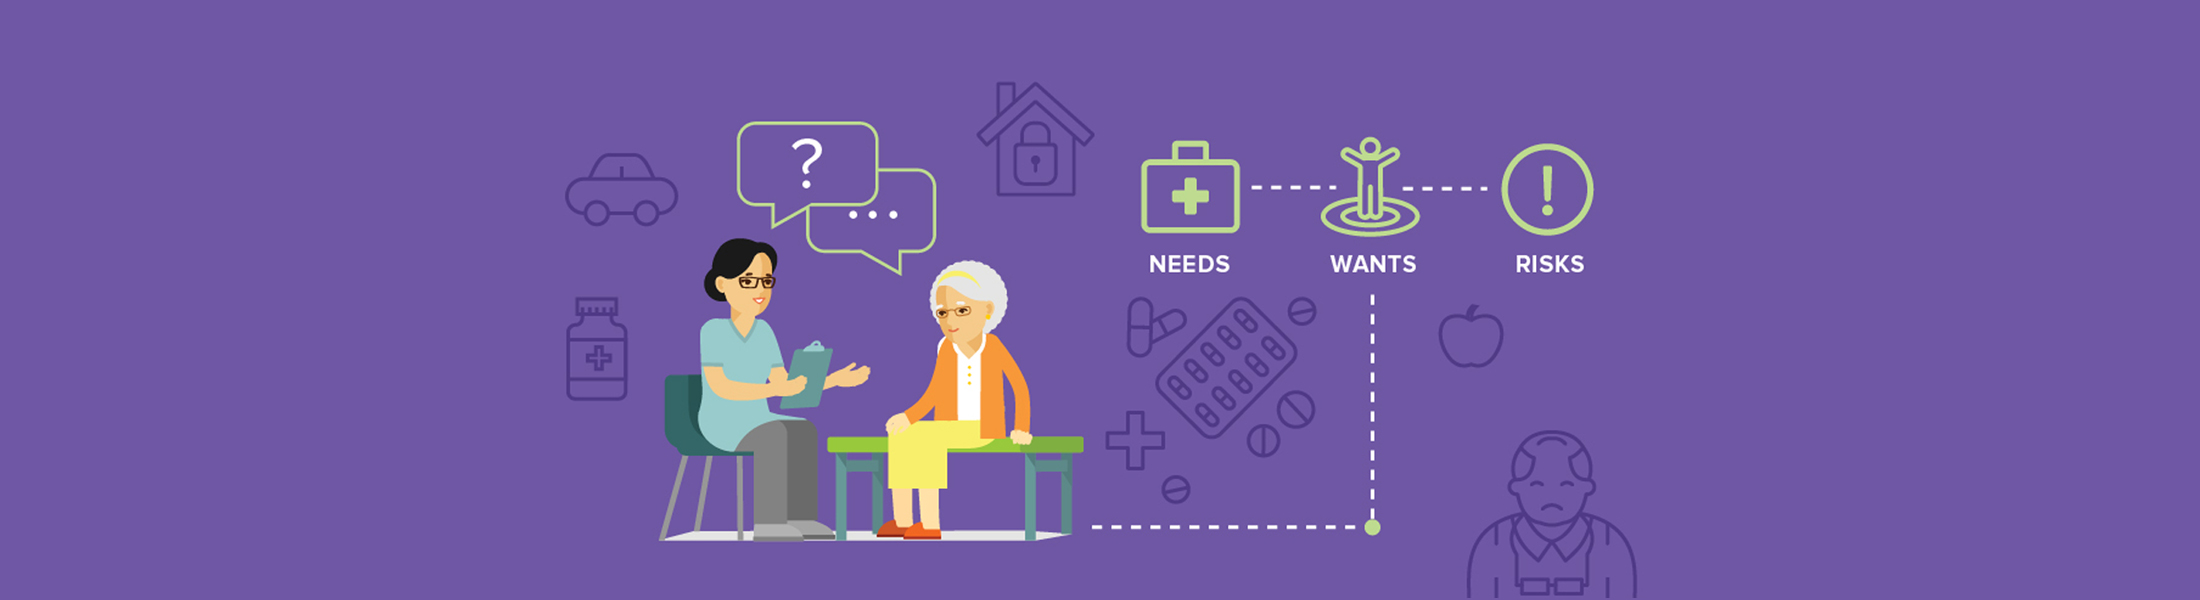 Considering a Geriatric Care Manager? What You Need to Know ...